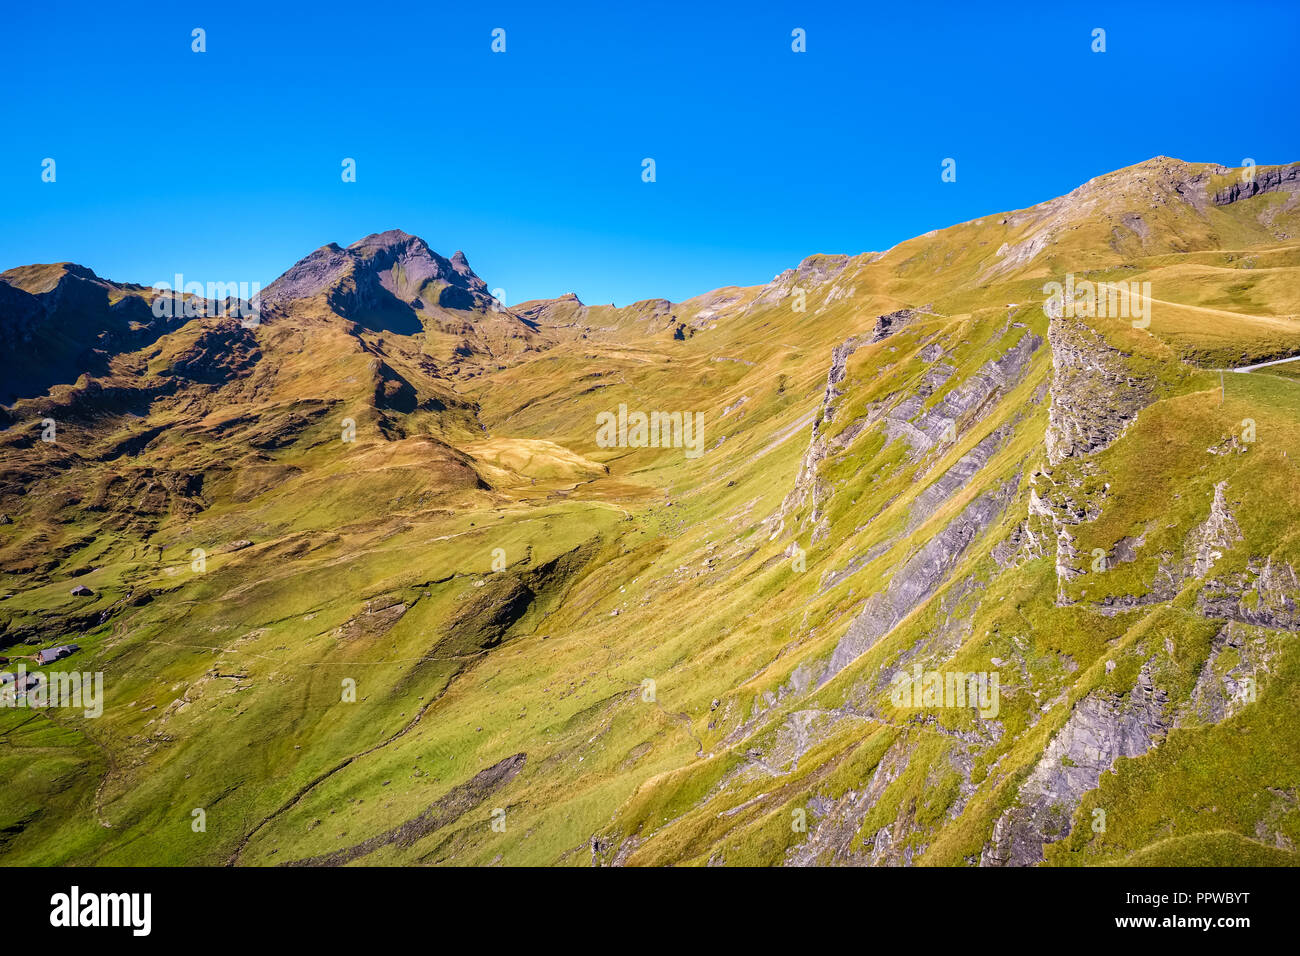 Gorgeous landscapes during the famous hiking trail from First to Grindelwald (Bernese Alps, Switzerland). Stock Photo